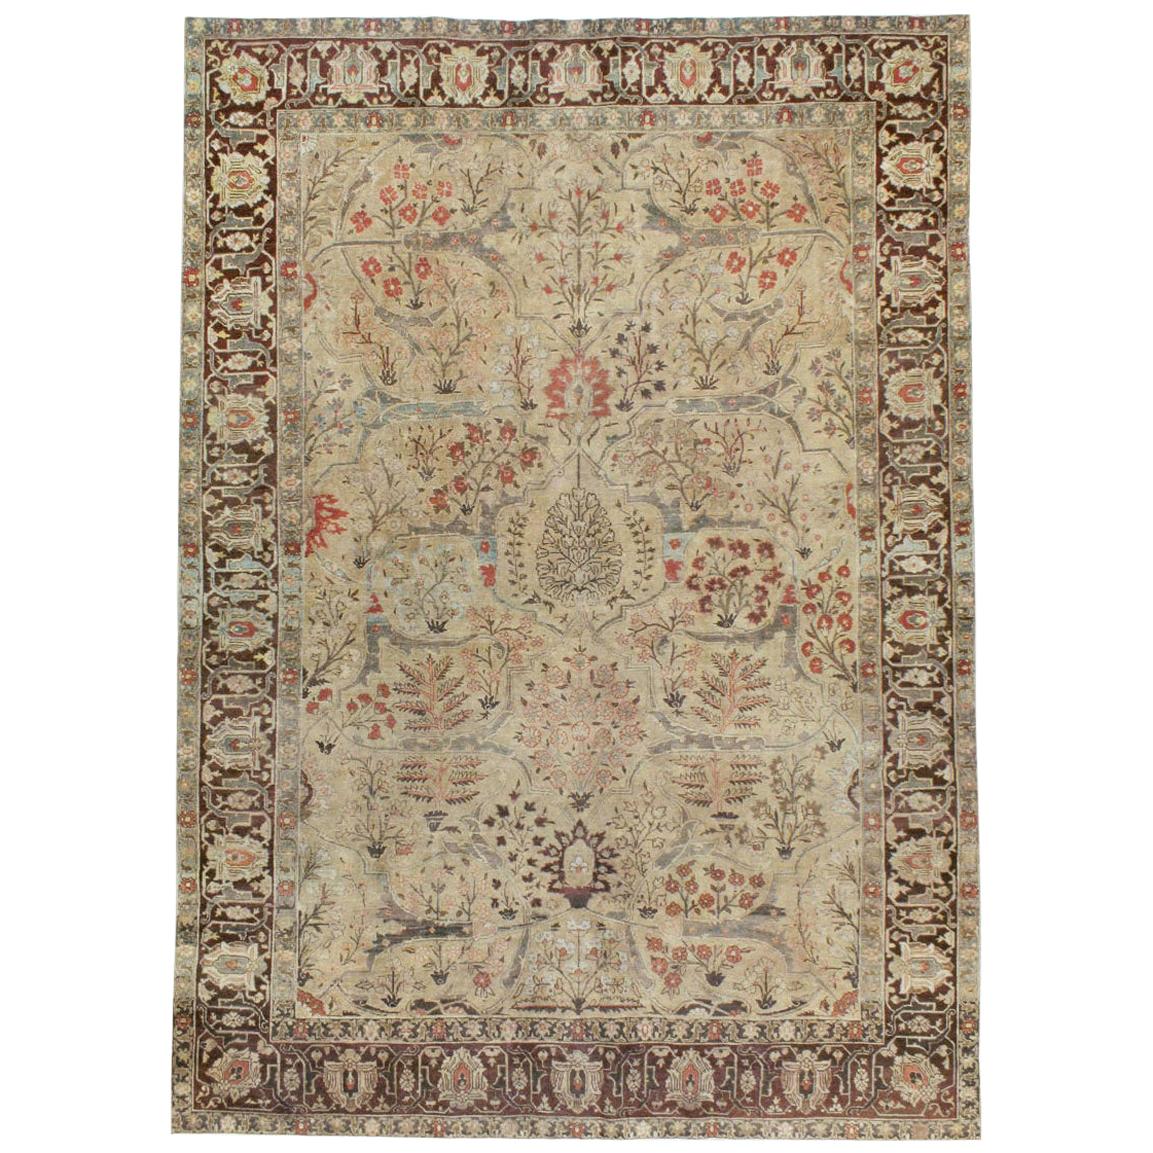 Early 20th Century Persian Tabriz Small Room Size Carpet in Maroon and Brown For Sale